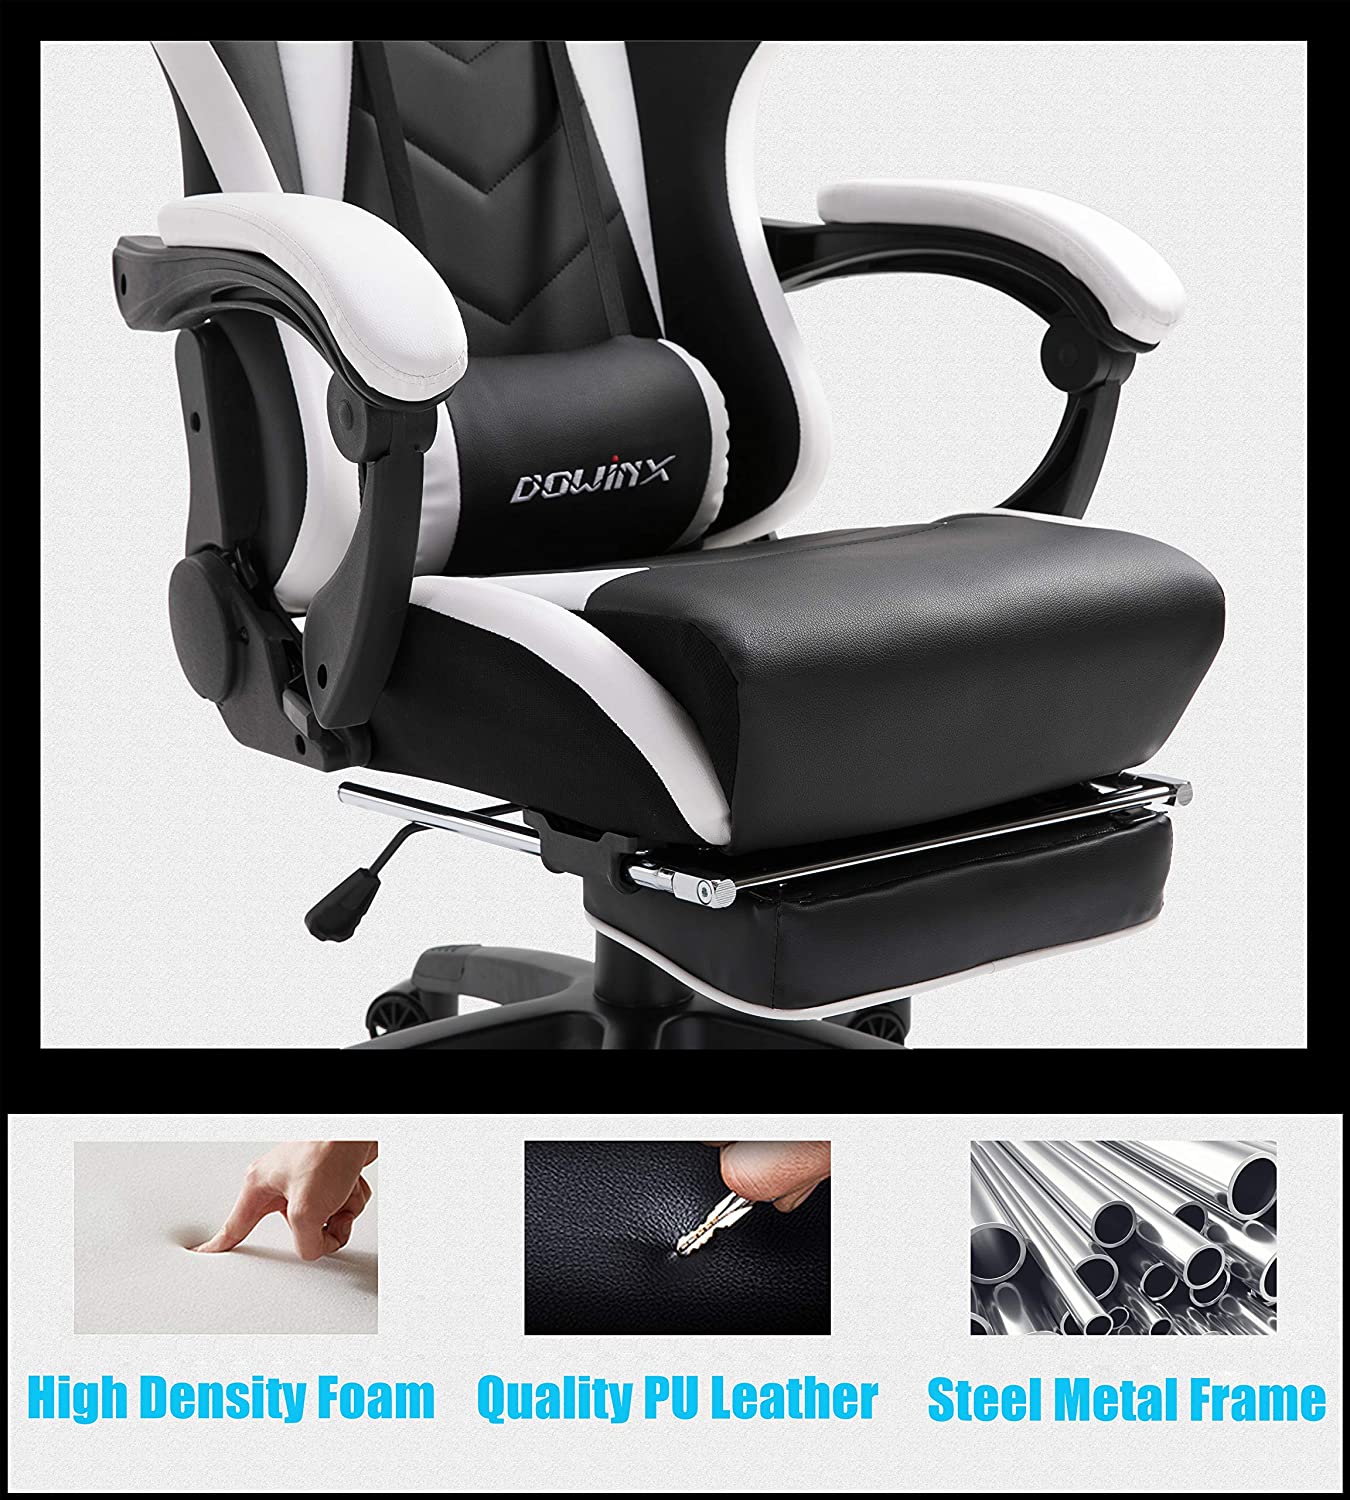 PU Leather Gaming Chair with USB Massage Lumbar Pillow and